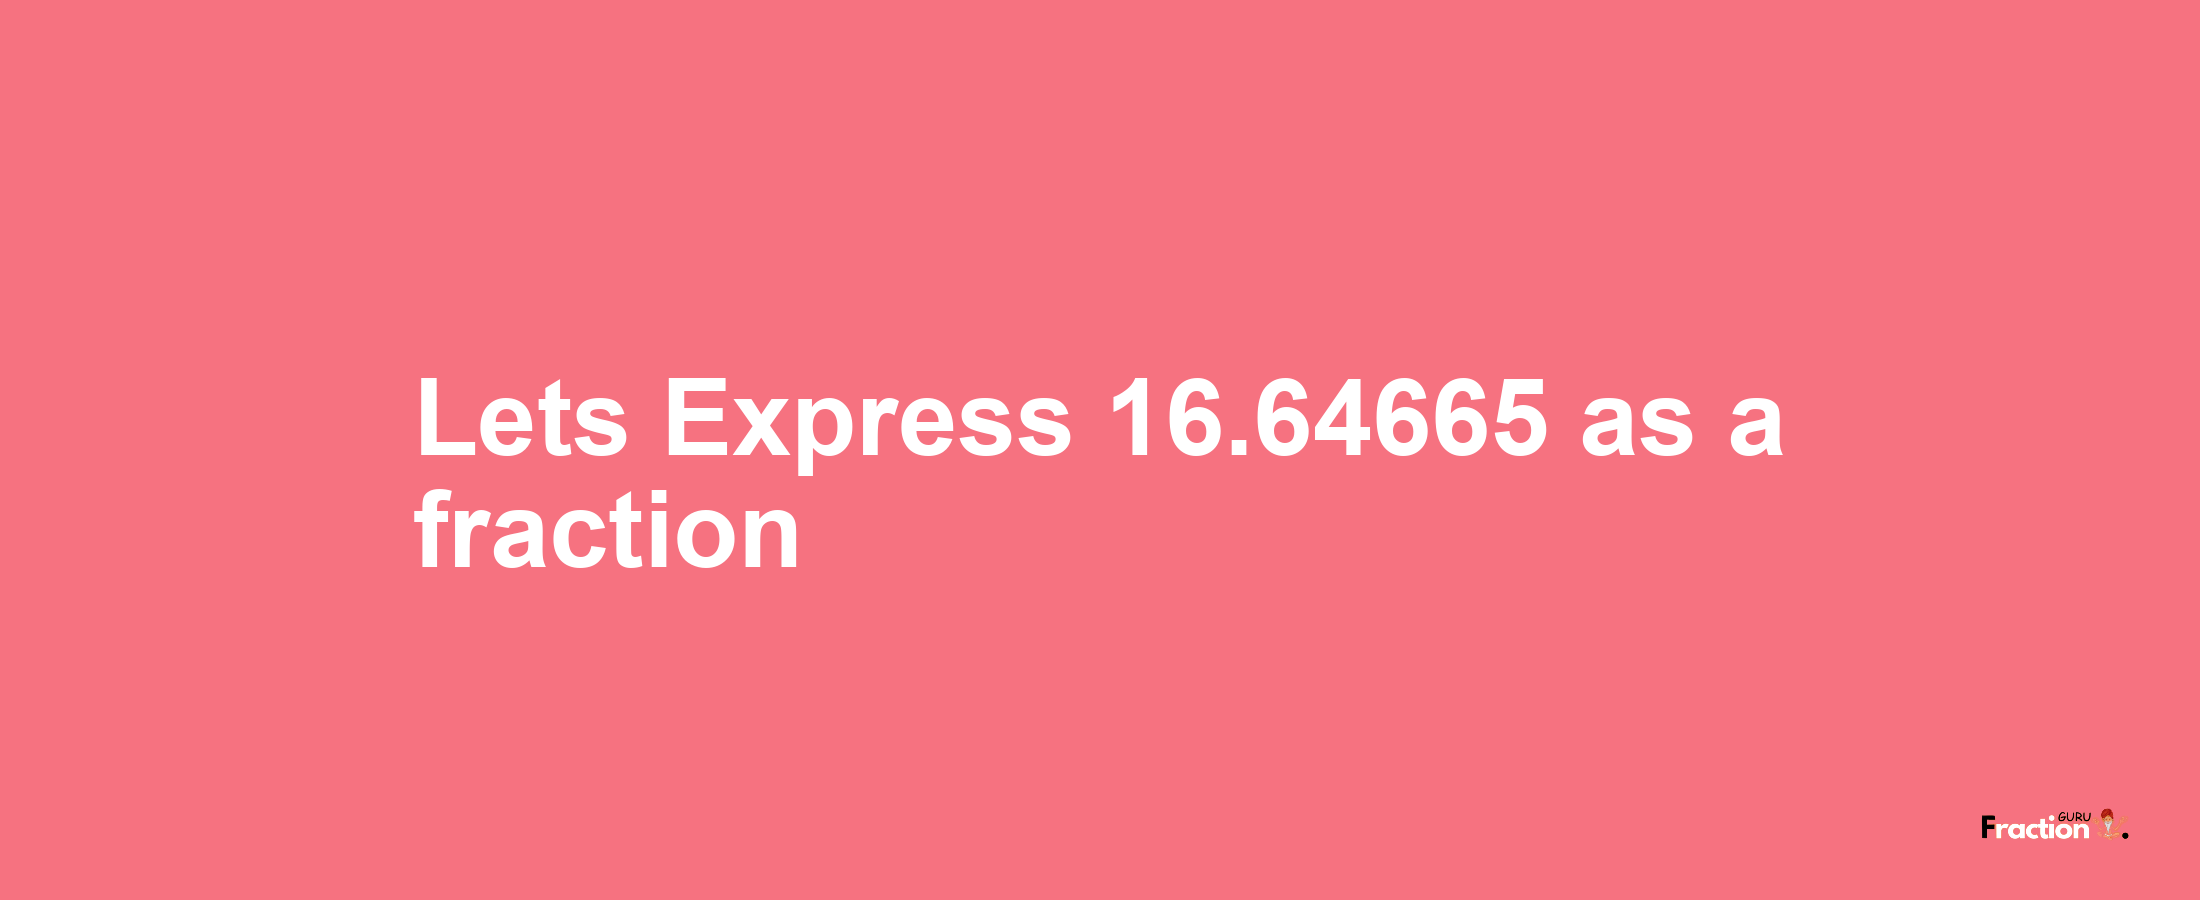 Lets Express 16.64665 as afraction